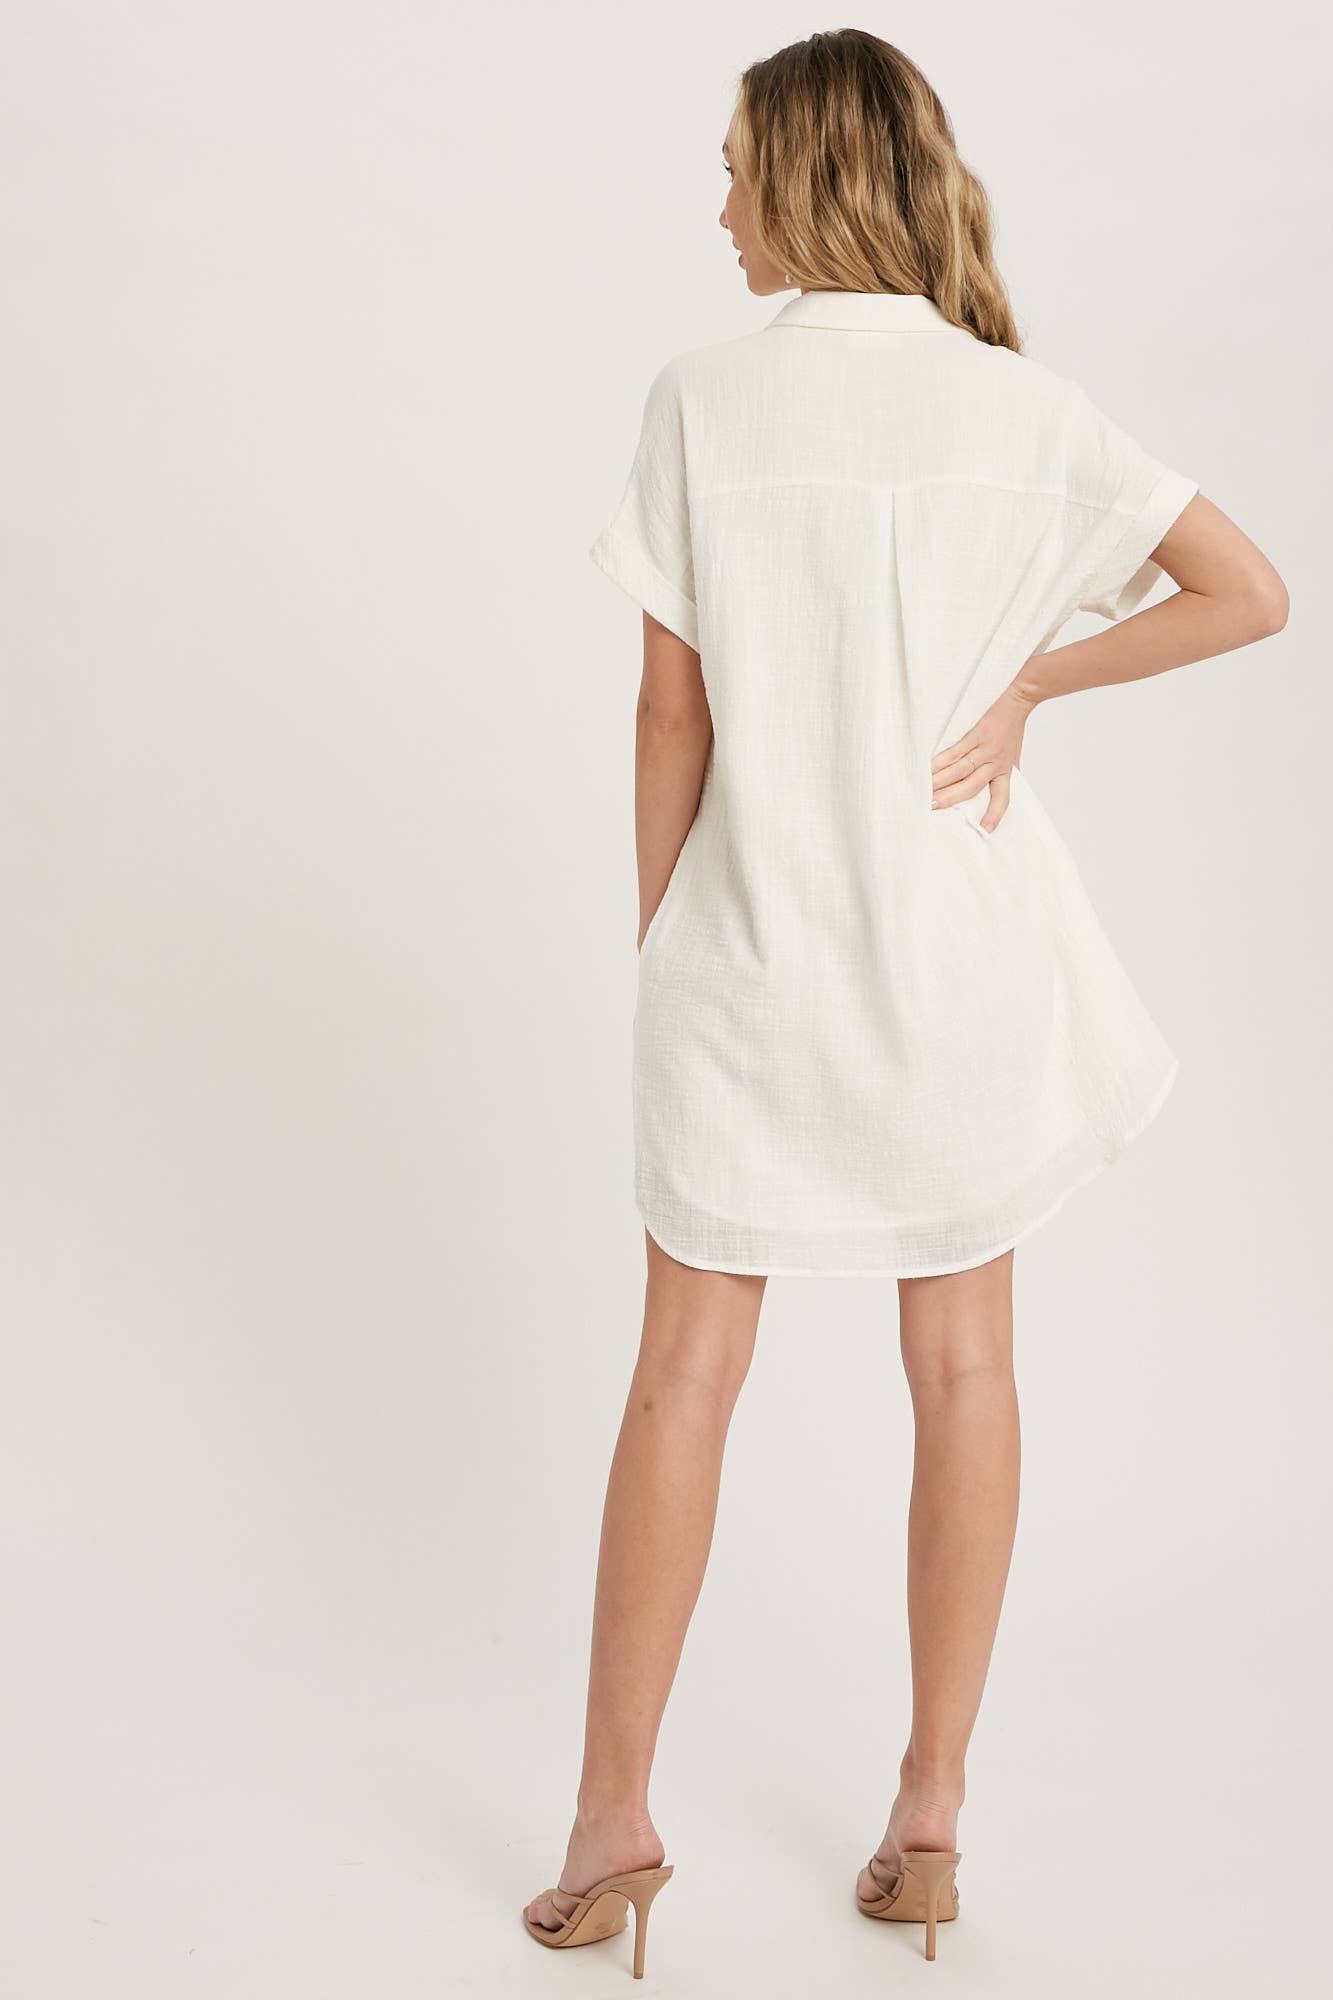 The Versatile Woven Button Up Mini Dress/Shirt with Pockets!!